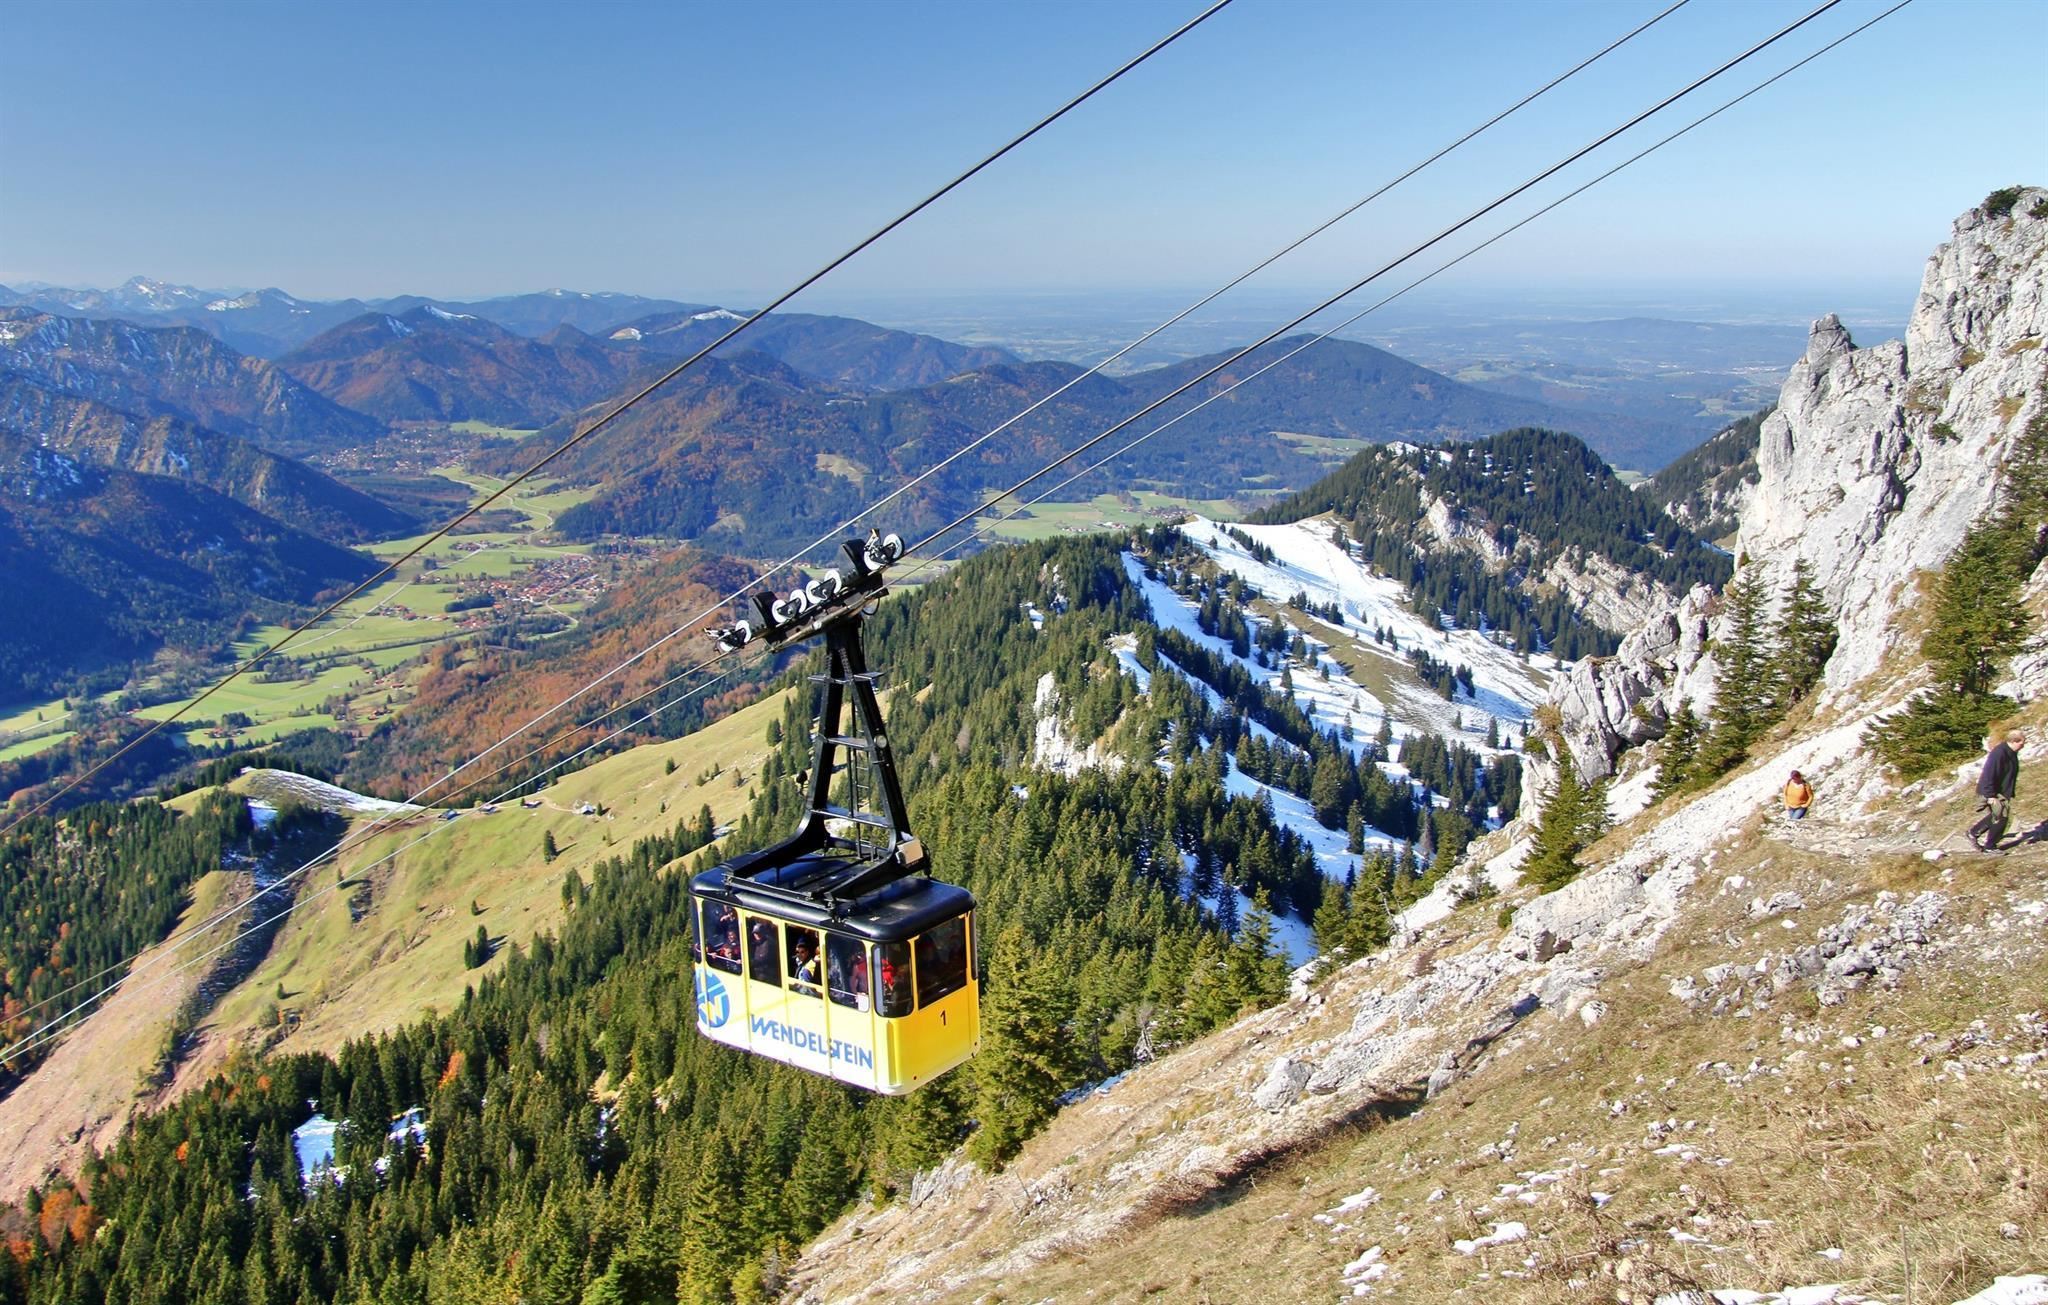 Wendelstein cable car